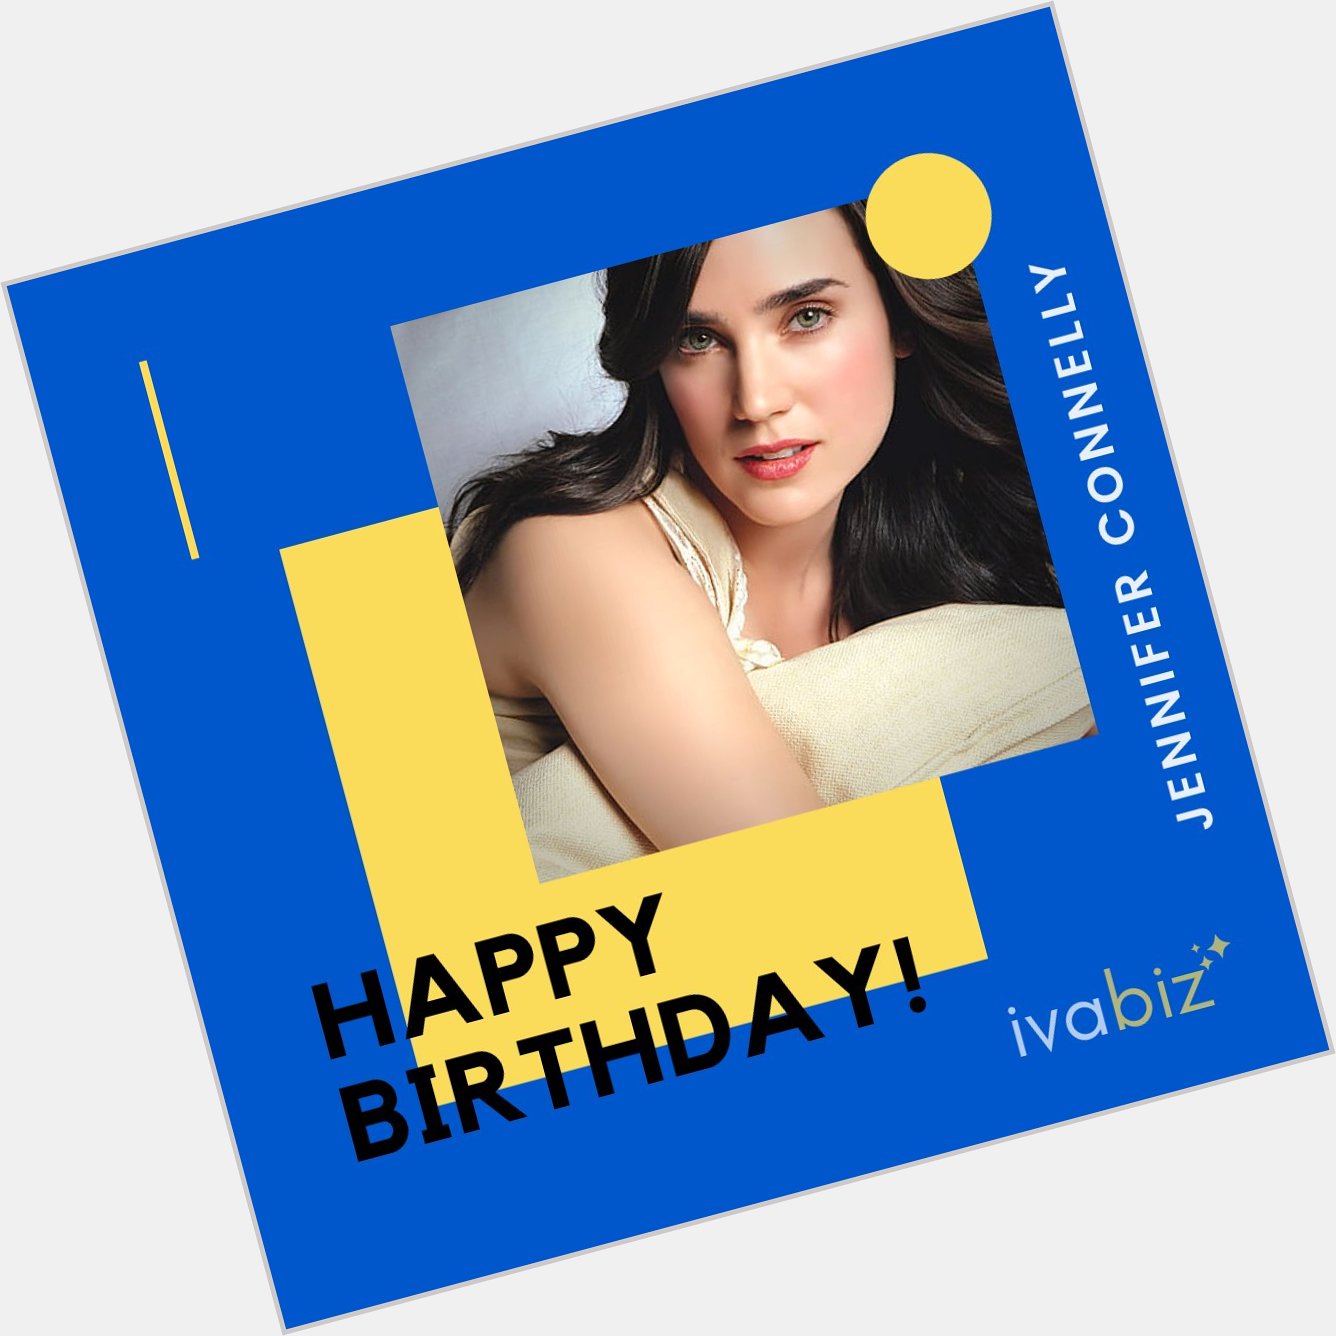 Wishing a very Happy Birthday to Gorgeous Jennifer Connelly   